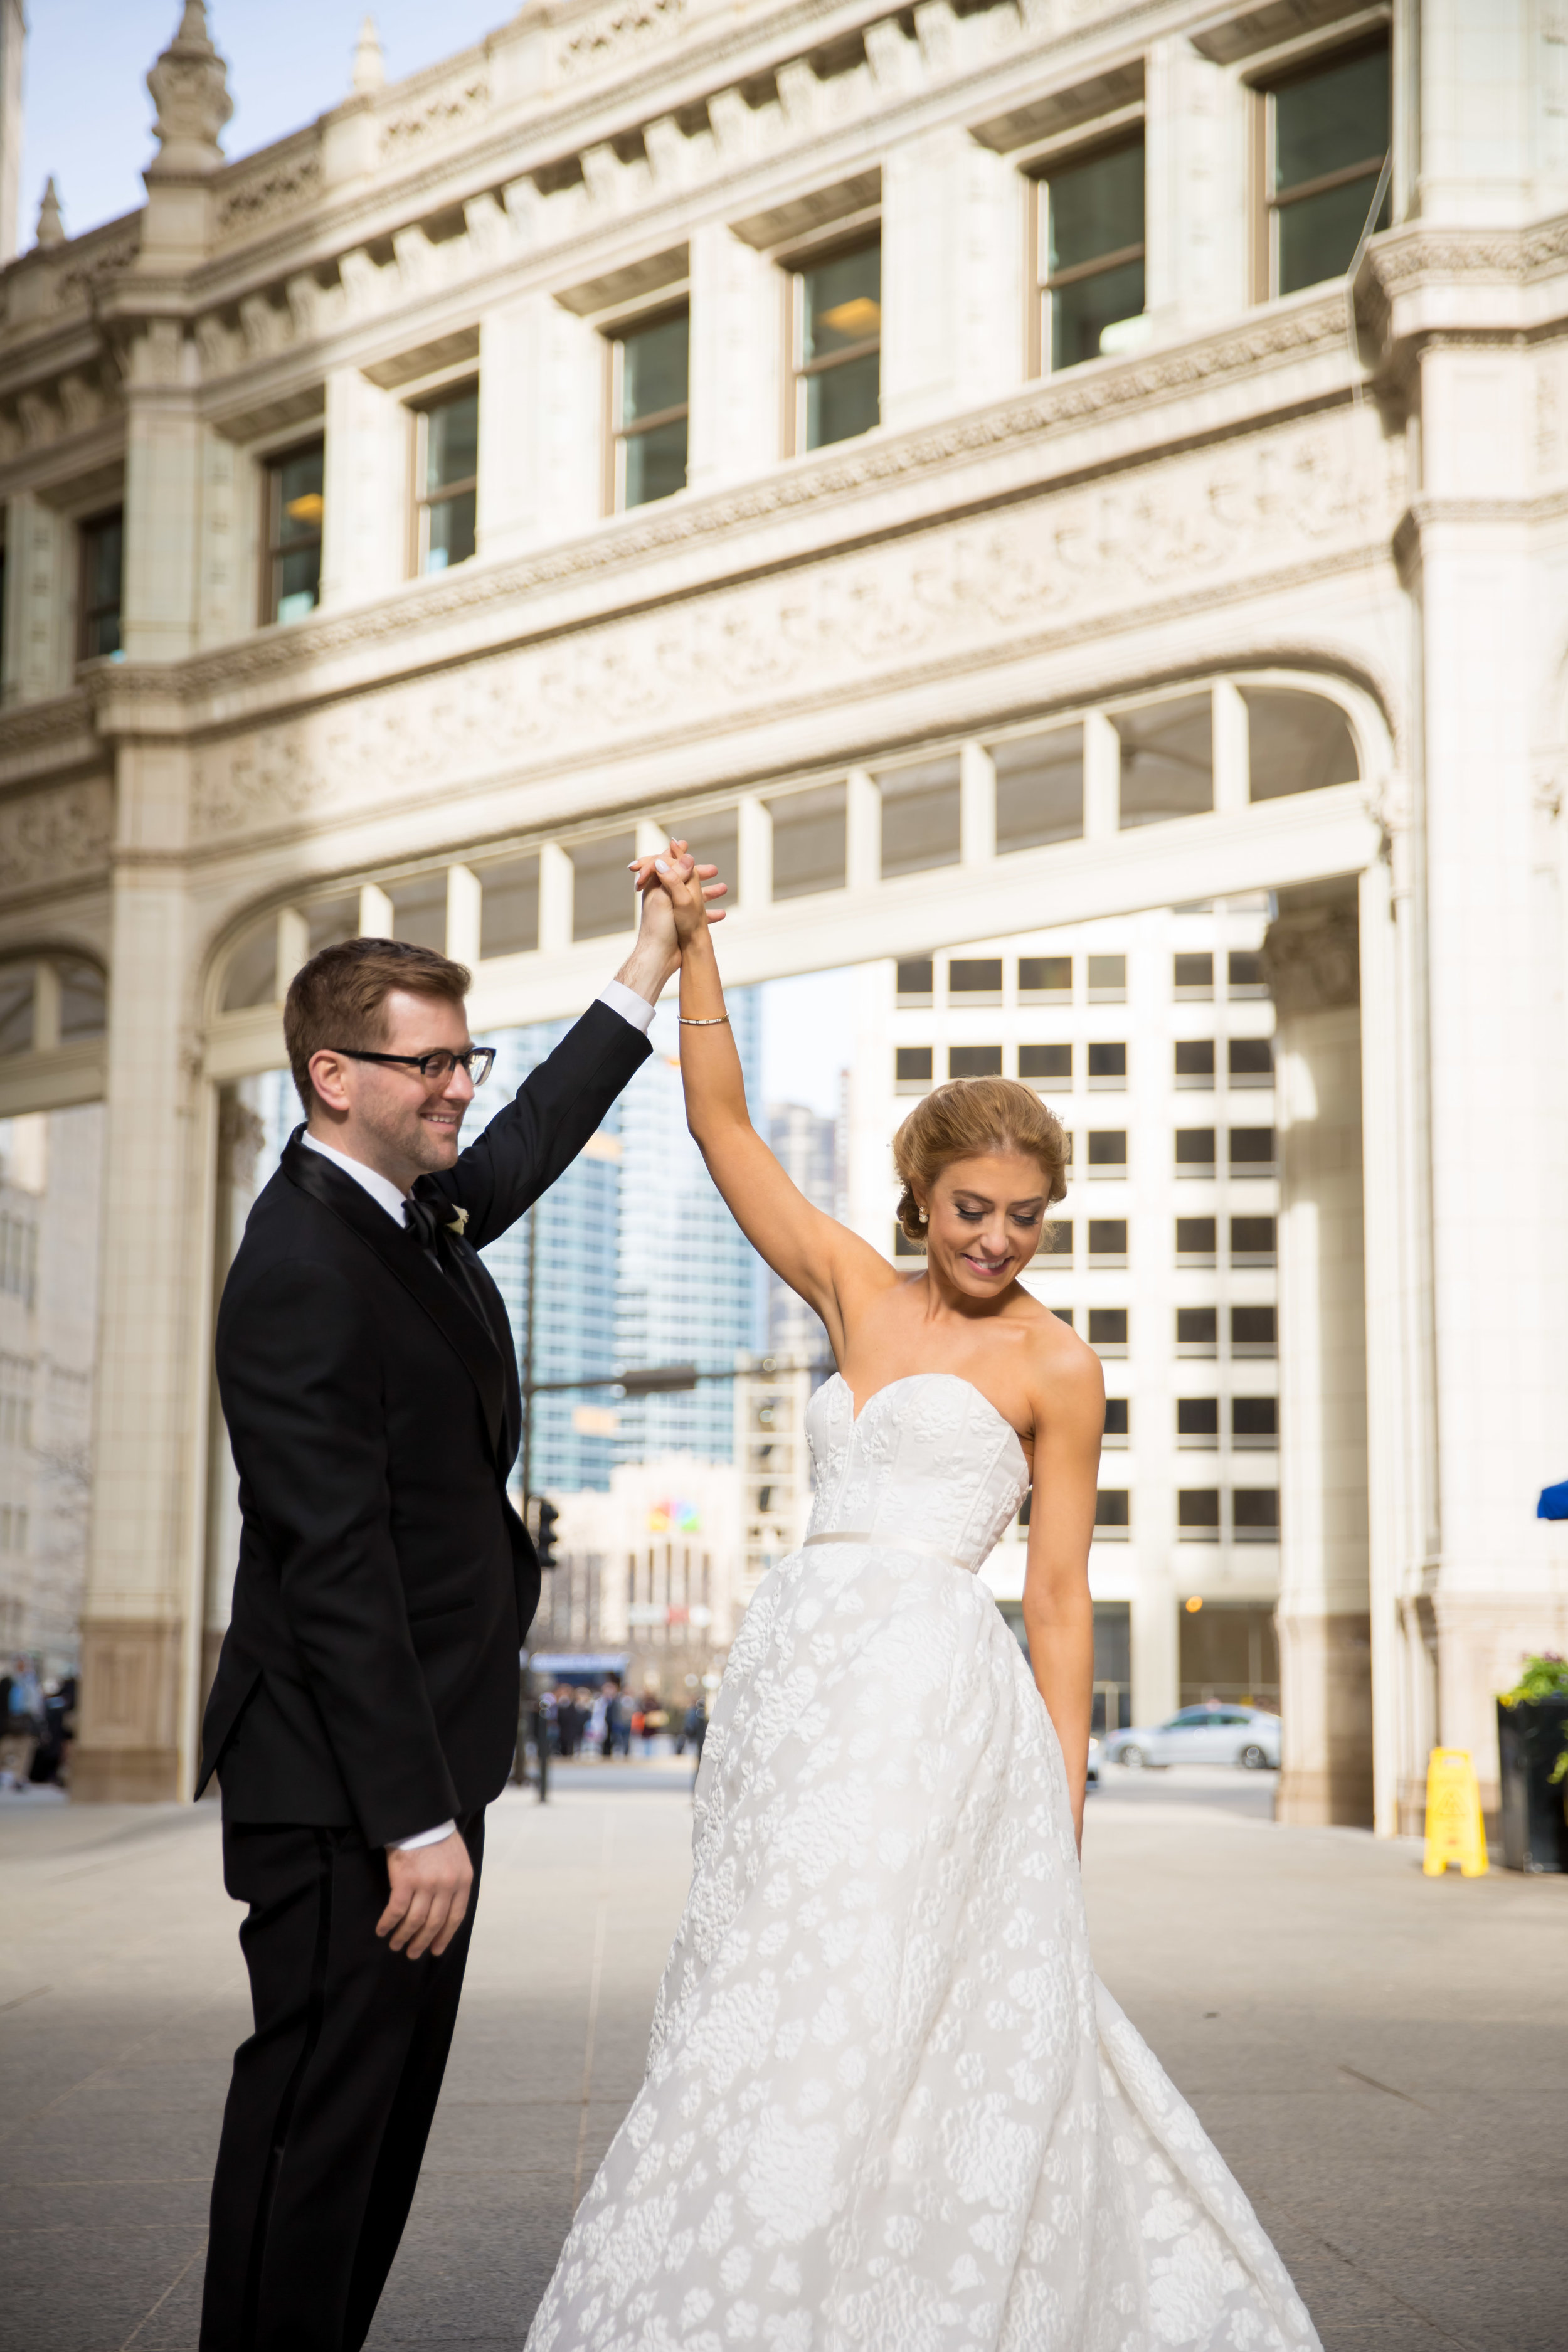 Charming and modern wedding details come together for this royal Chicago wedding captured by Colin Lyons Photography. Find more wedding inspiration at chitheewed.com!